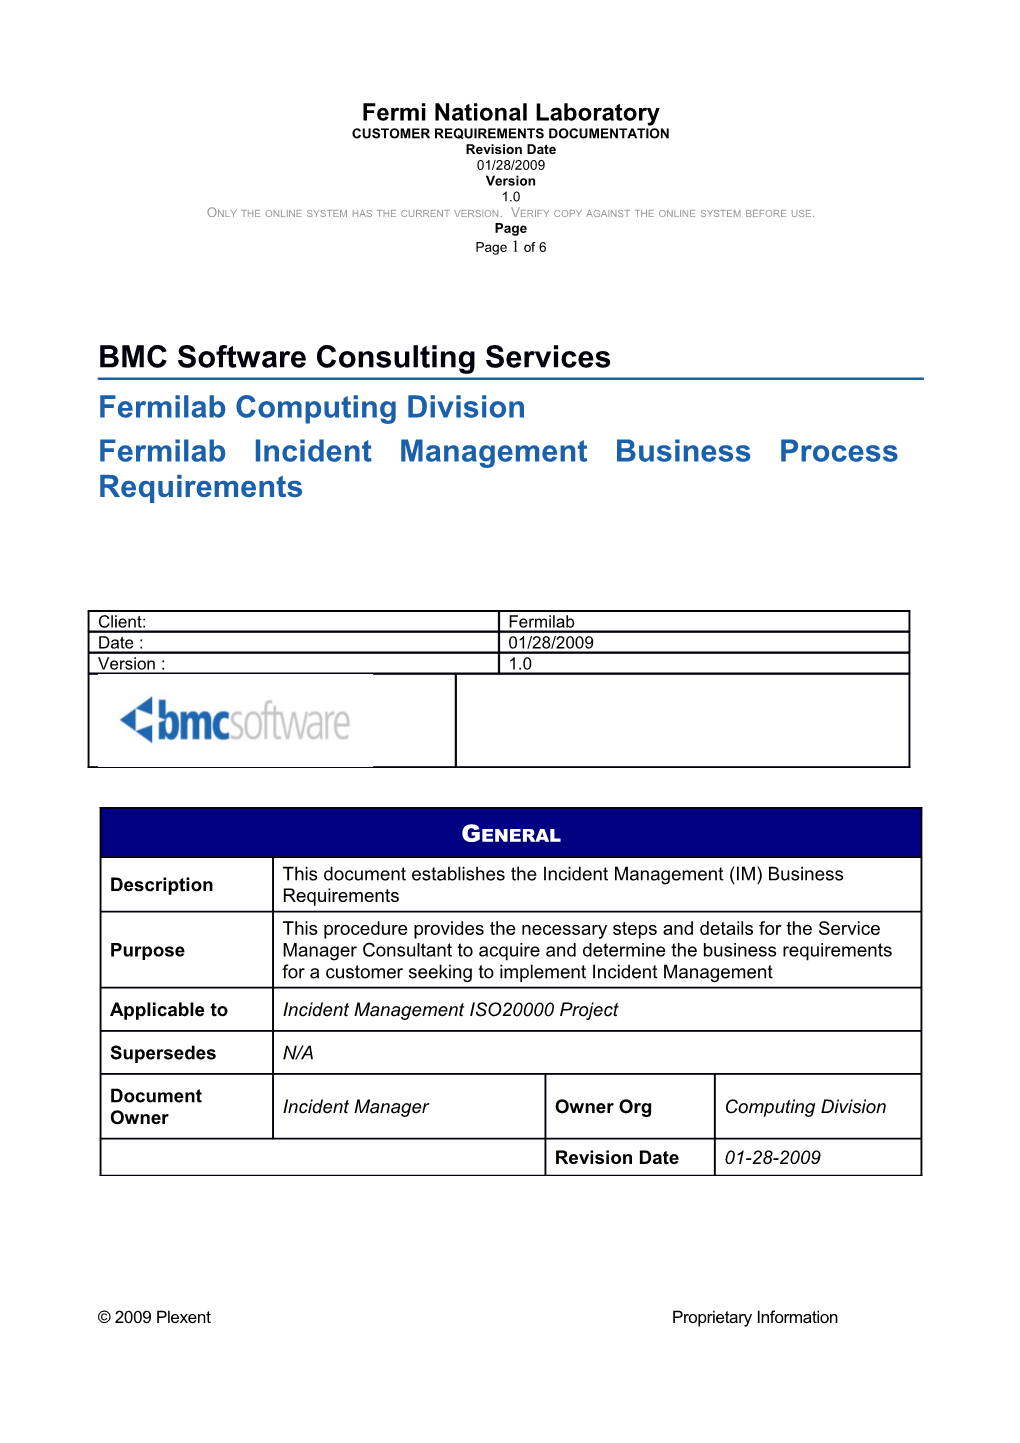 Fermilab Incident Business Process Requirements Document 1.0